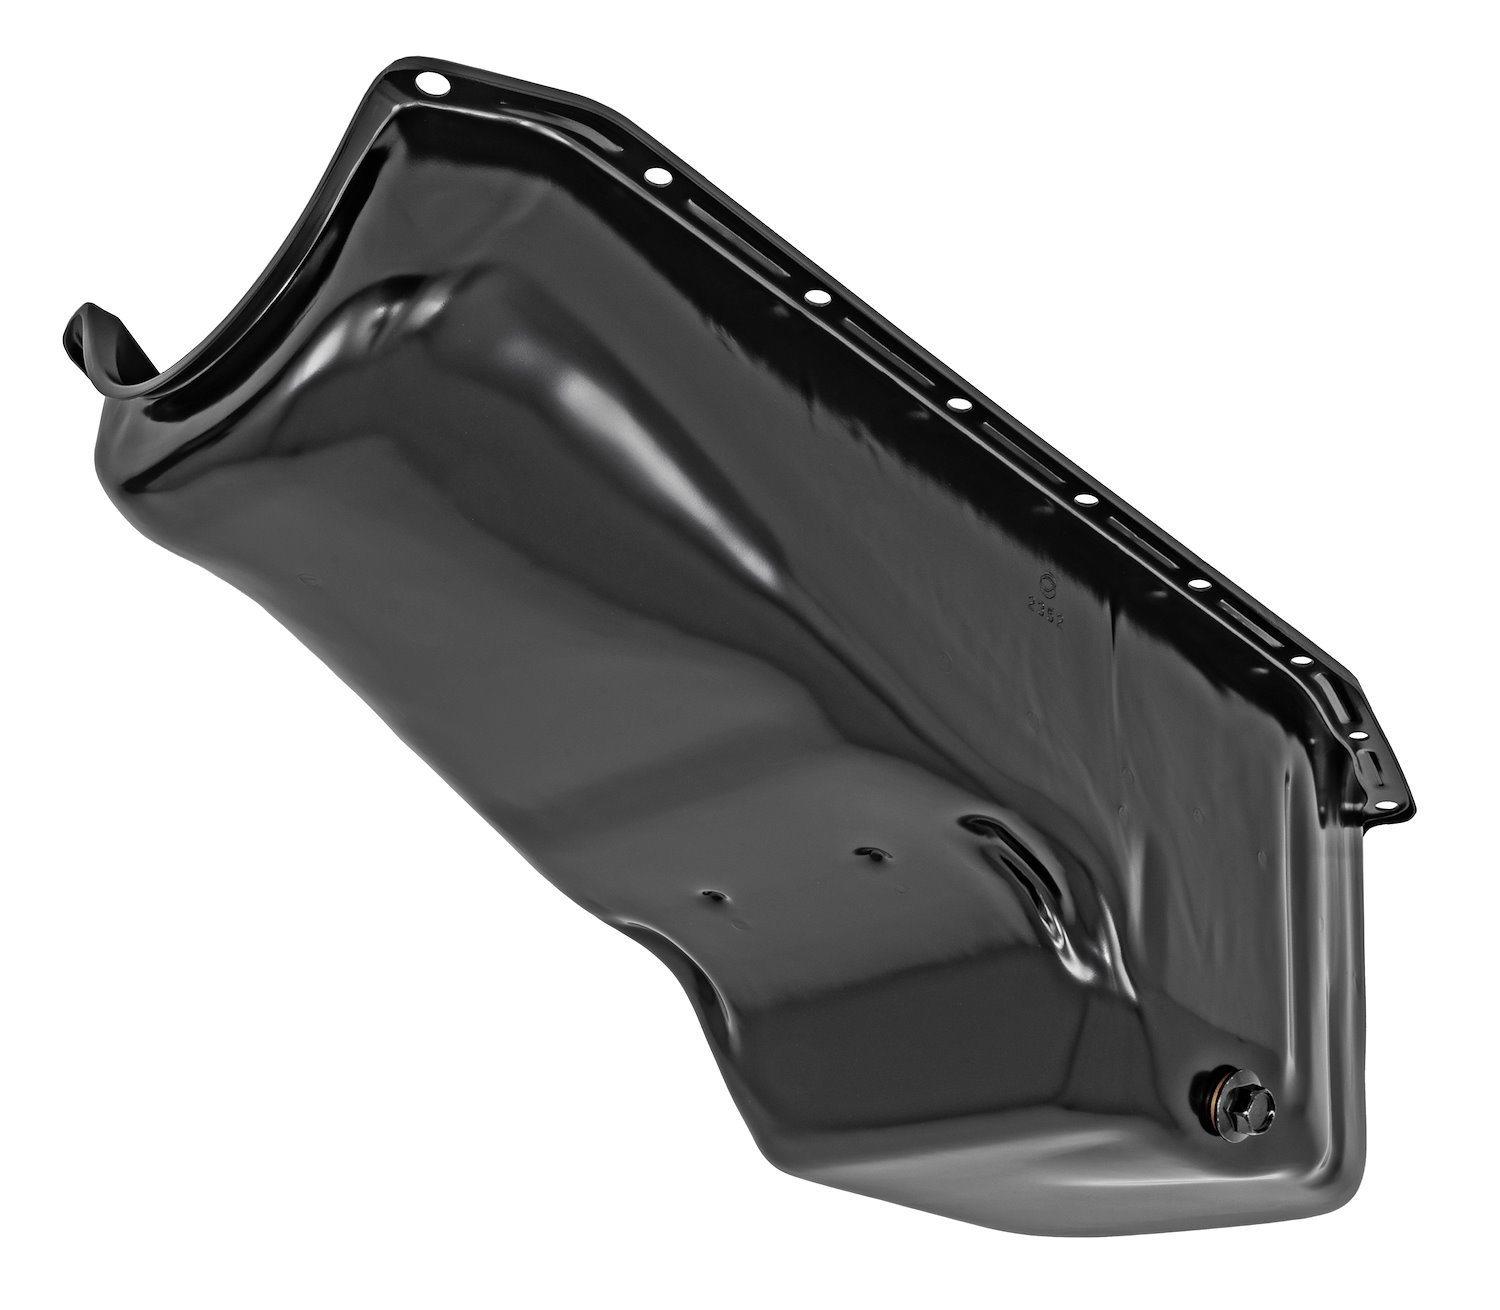 Stock-Style Replacement Oil Pan Fits Select 1978-1985 GM Model Cars & Trucks w/305 or 350 V8 Engine [Black]